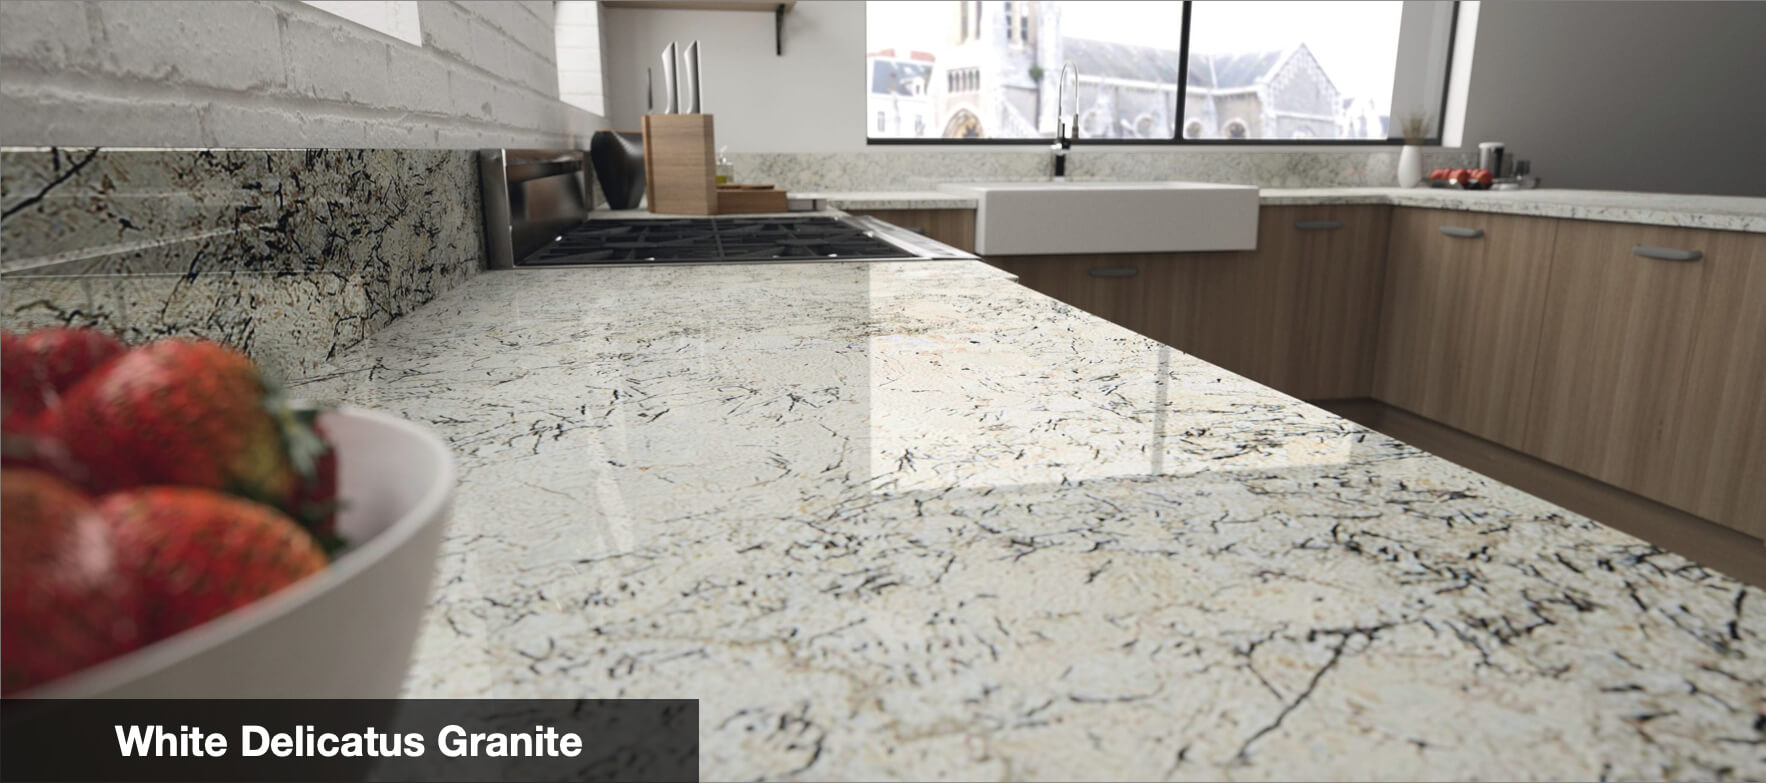 granite countertops, should you install them in your tampa fl home?